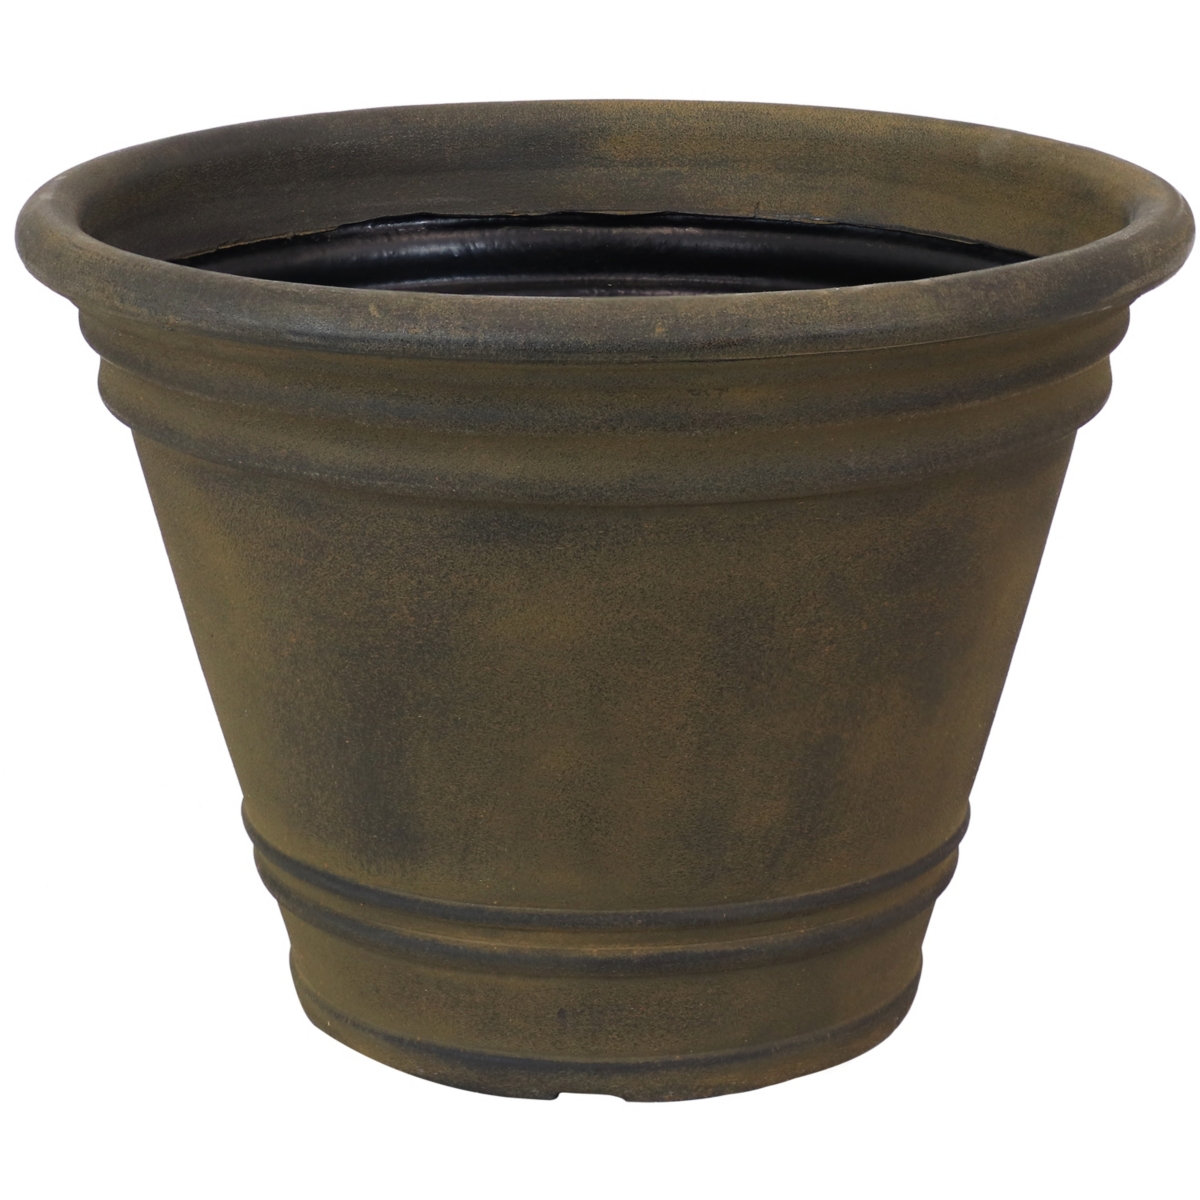 20 in Franklin Polyresin Planter with Uv-Resistant Finish - Sable - Brown